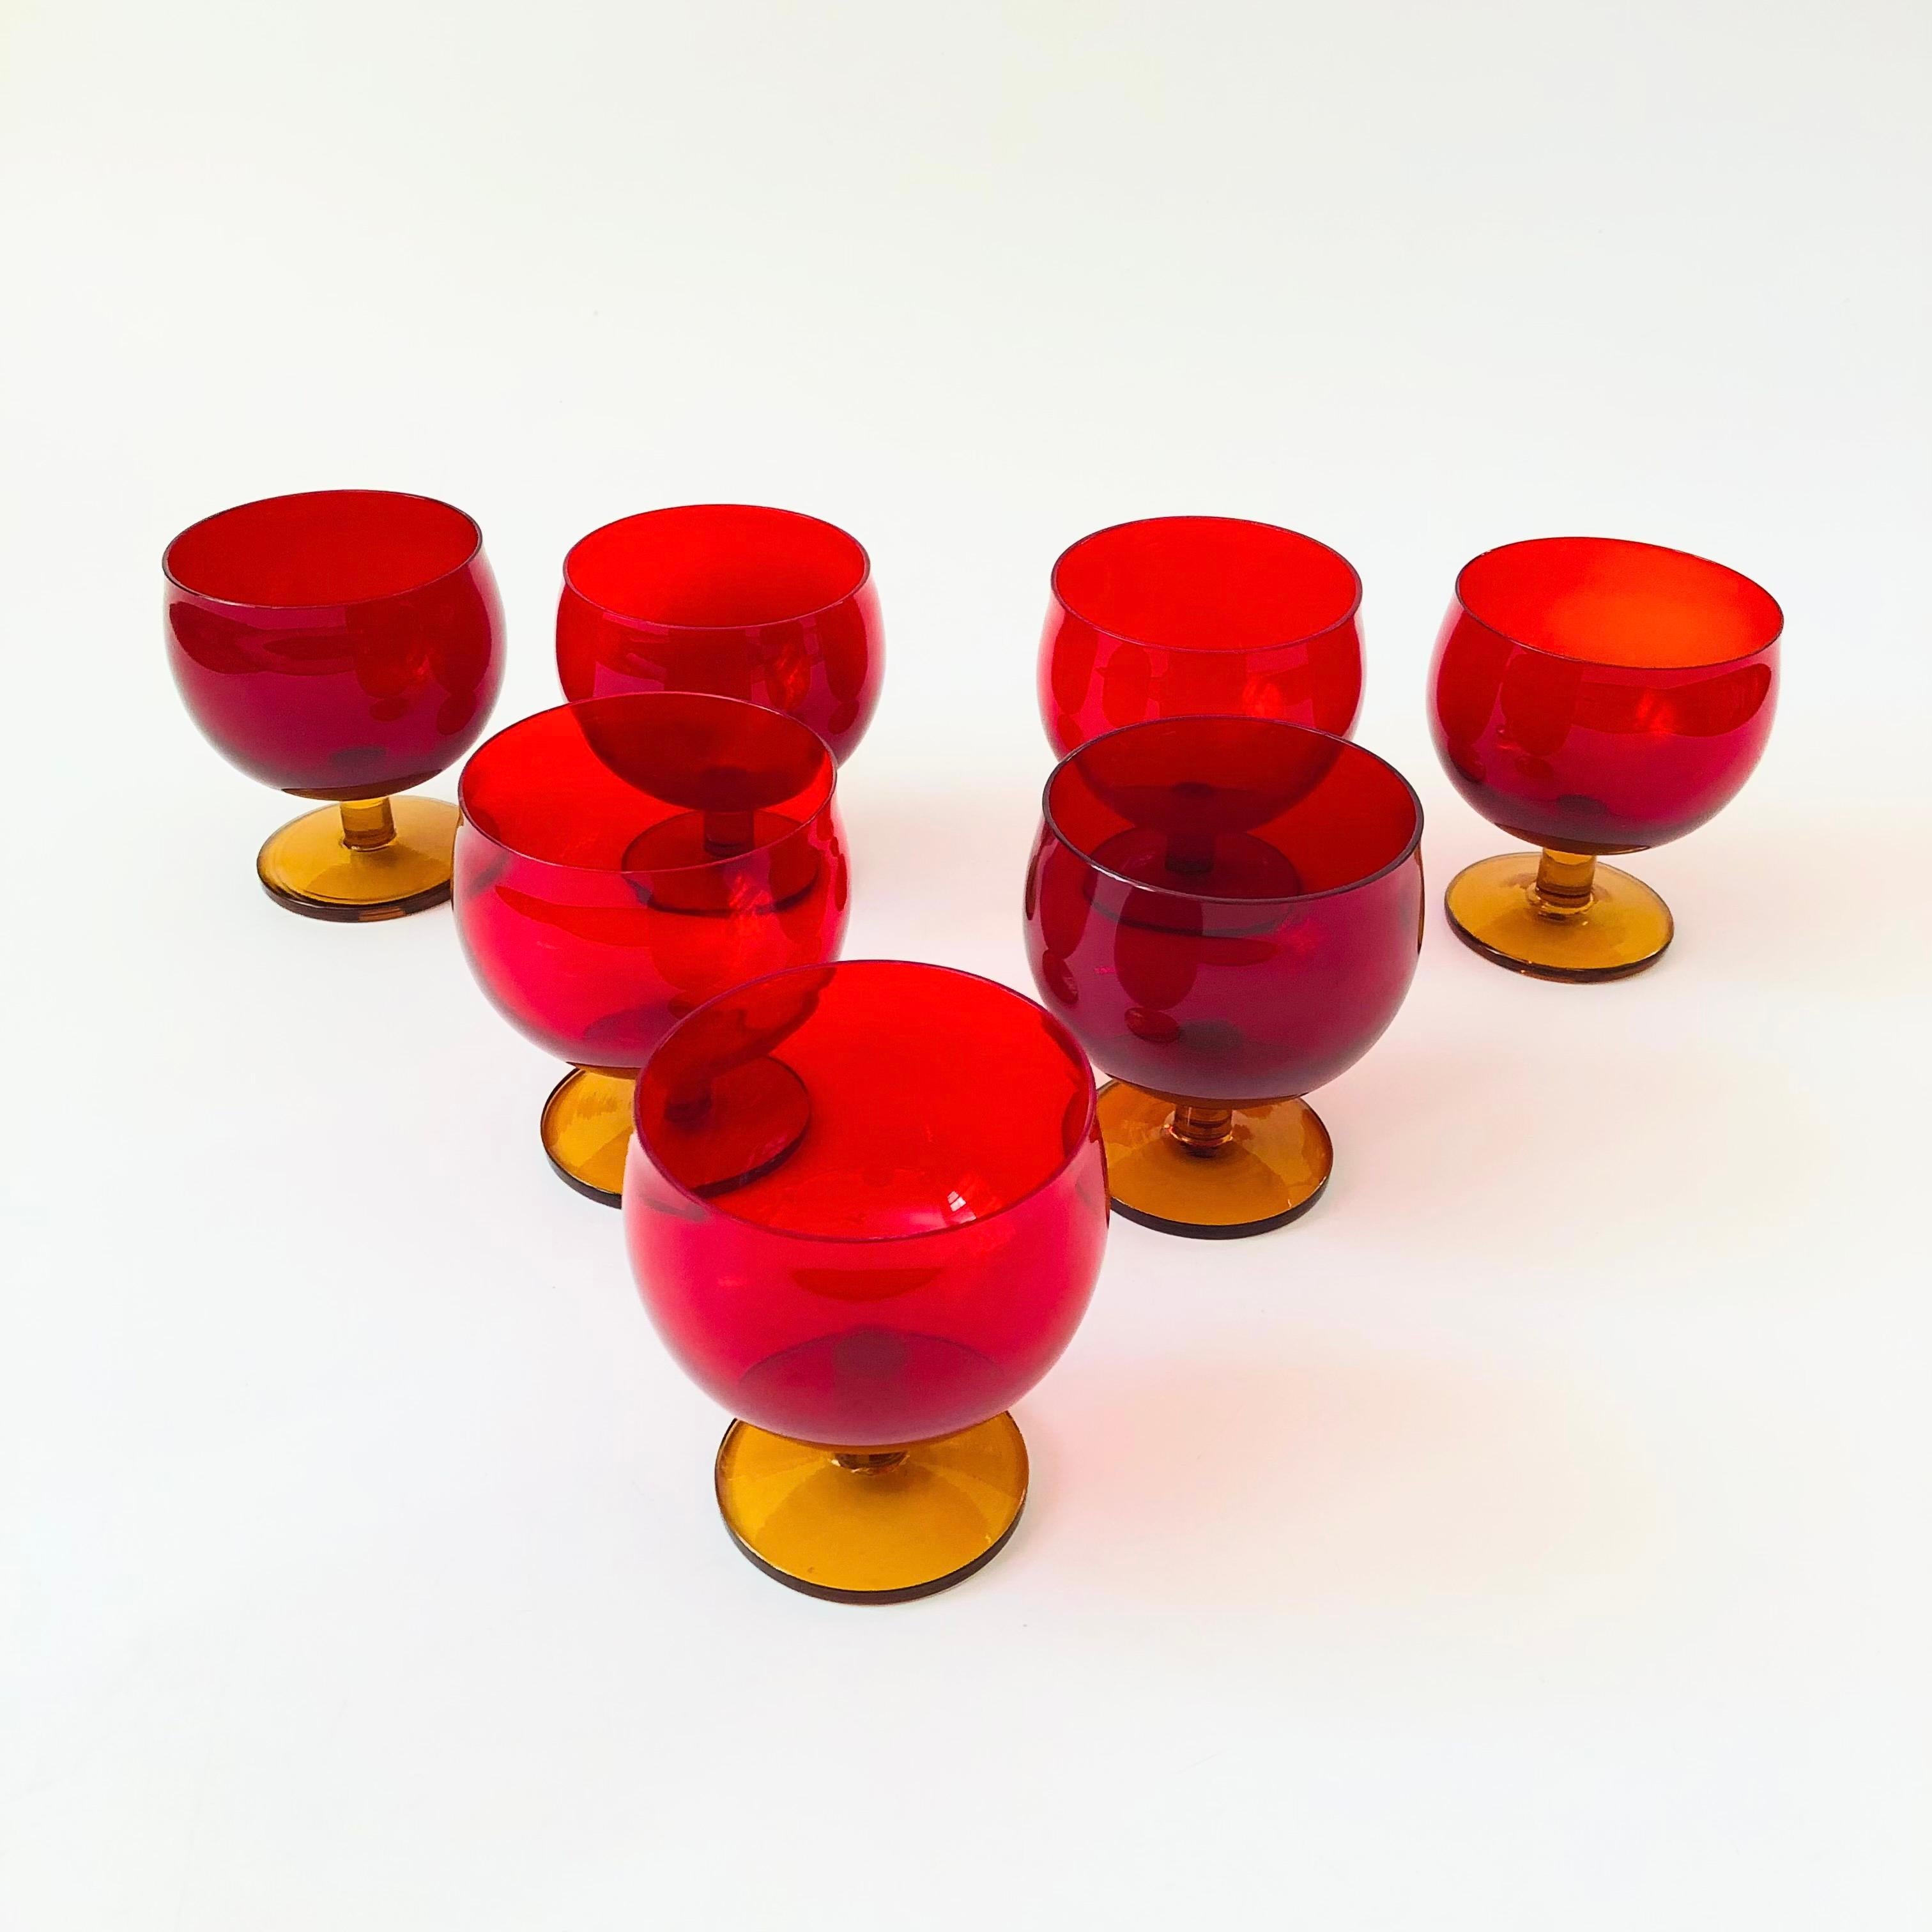 A set of 7 vibrant mid century wine glasses. Each with ruby red tops and amber stems. Subtle variation in the red hue of each glass. A beautiful and unique set.

